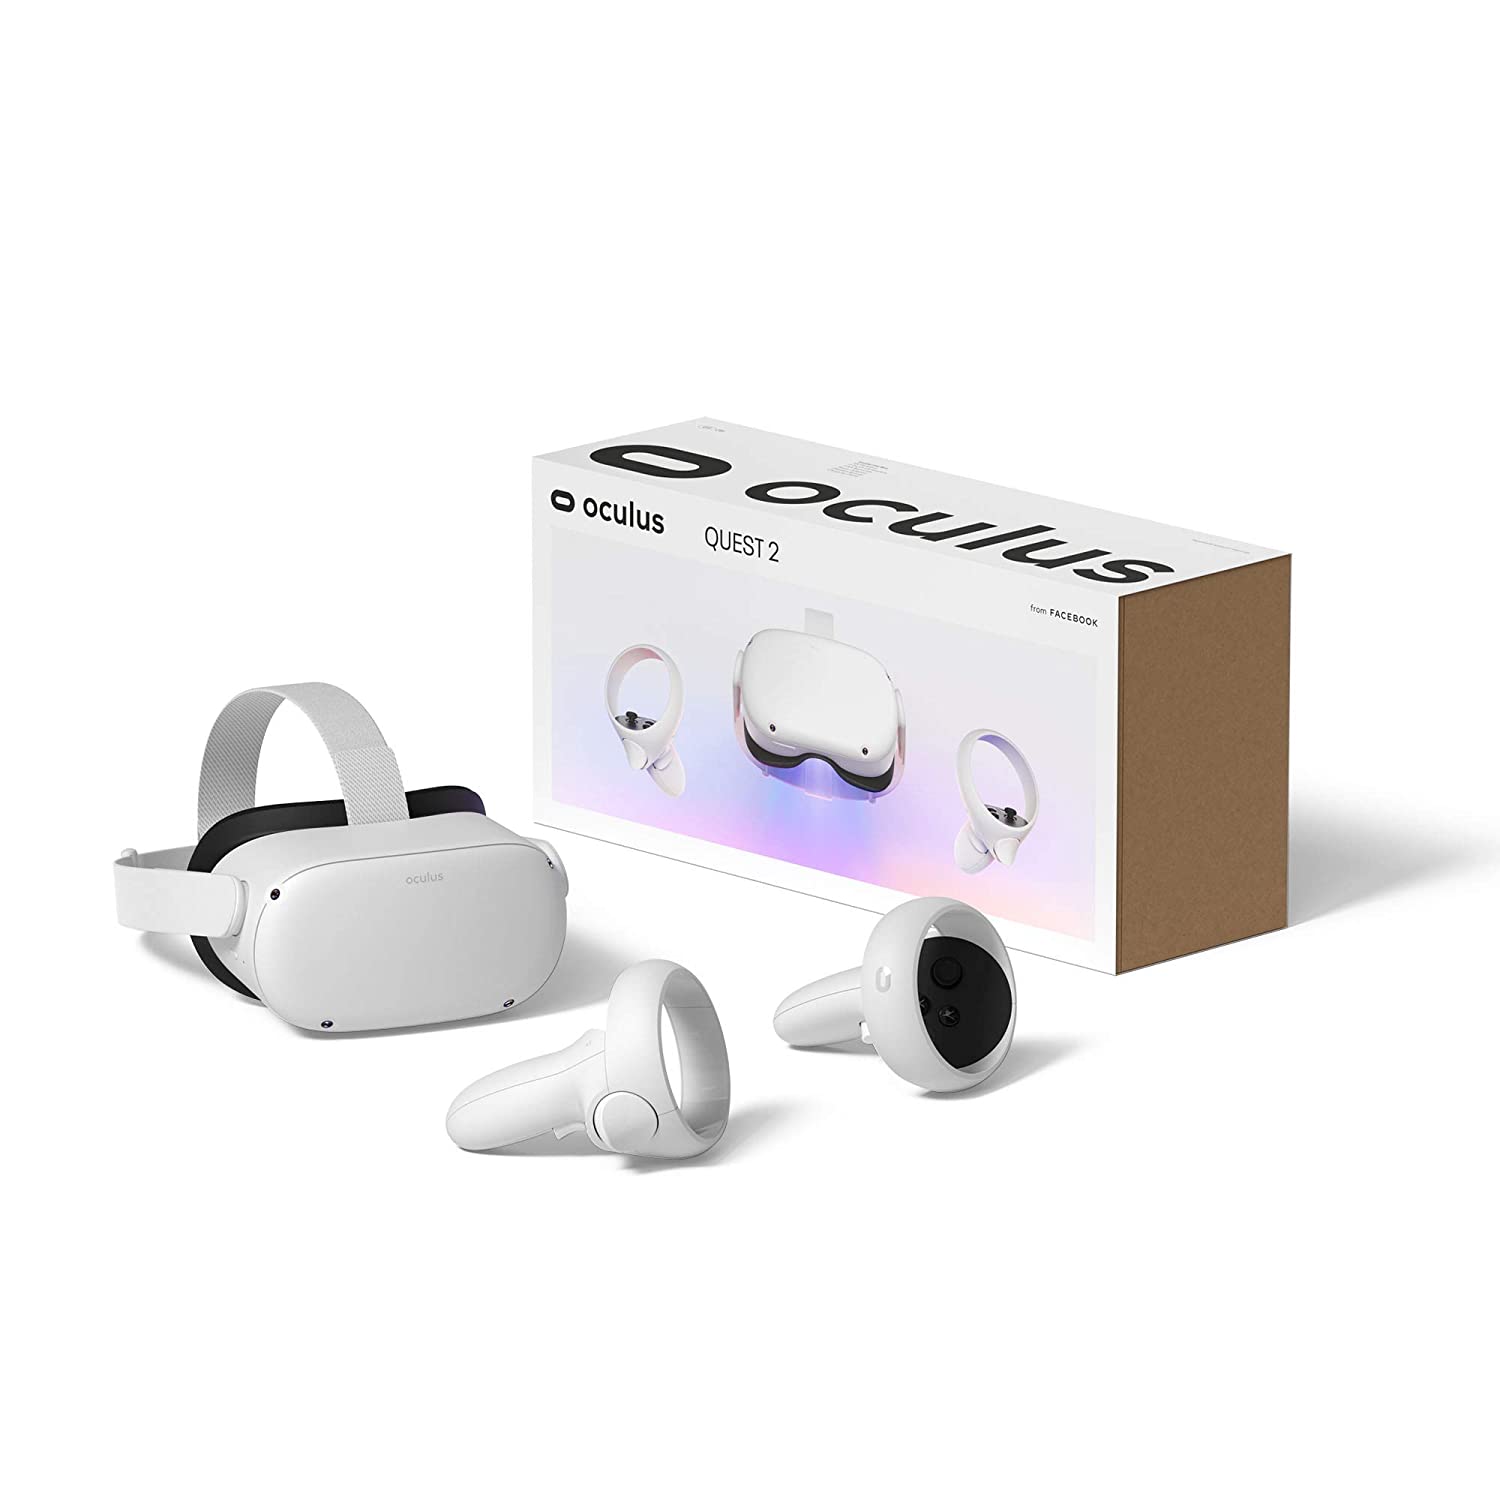 oculus virtual reality headset - Valentines Day Gifts for Him that He will Obsess Over